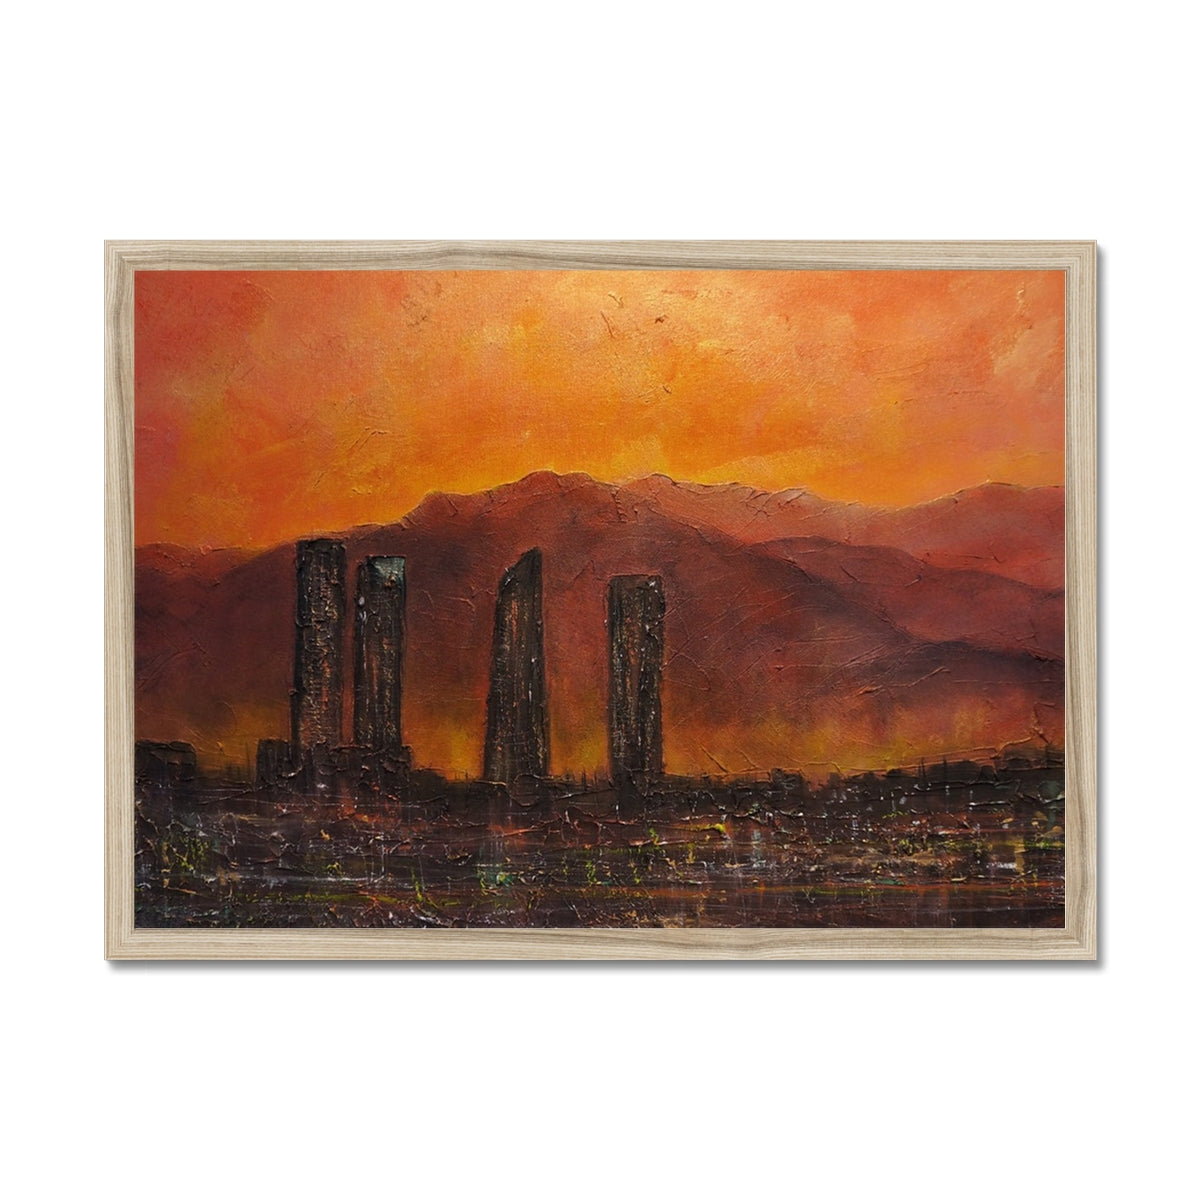 Madrid Dusk Painting | Framed Prints From Scotland-Framed Prints-World Art Gallery-A2 Landscape-Natural Frame-Paintings, Prints, Homeware, Art Gifts From Scotland By Scottish Artist Kevin Hunter